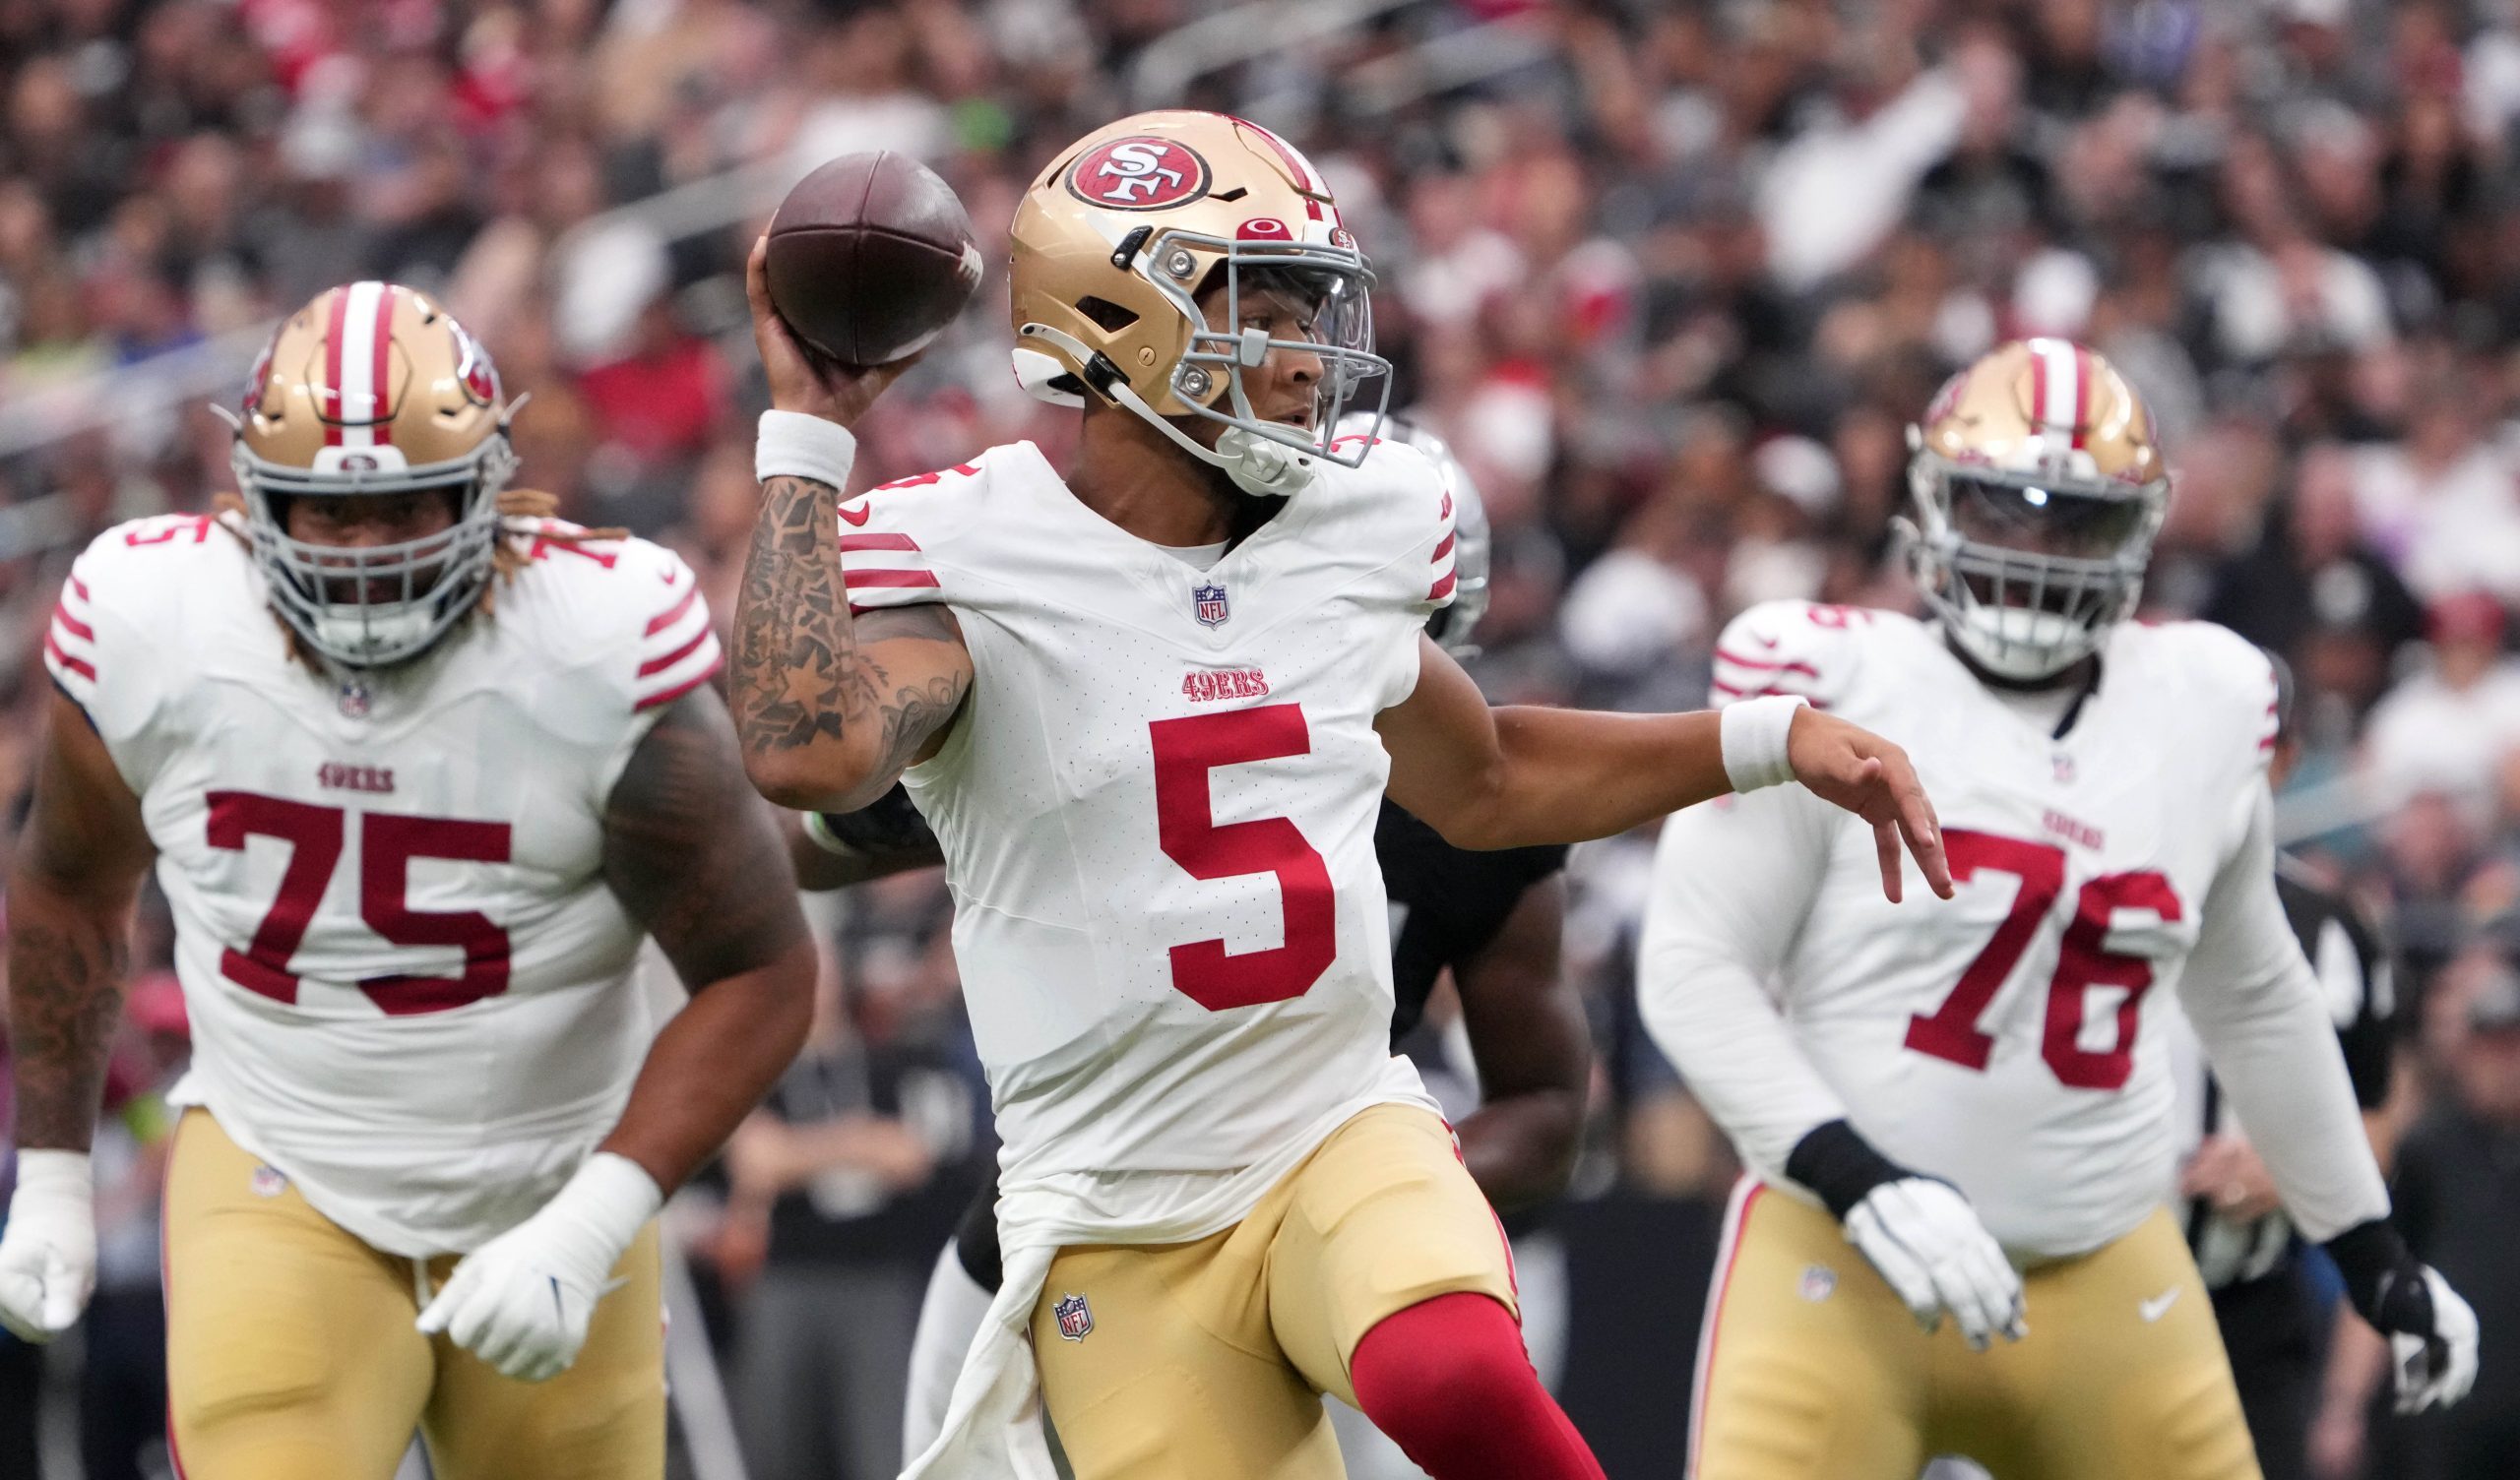 49ers quarterback Trey Lance started the preseason opener against the Raiders. His performance left a lot of questions. Photo Credit: Kirby Lee-USA TODAY Sports